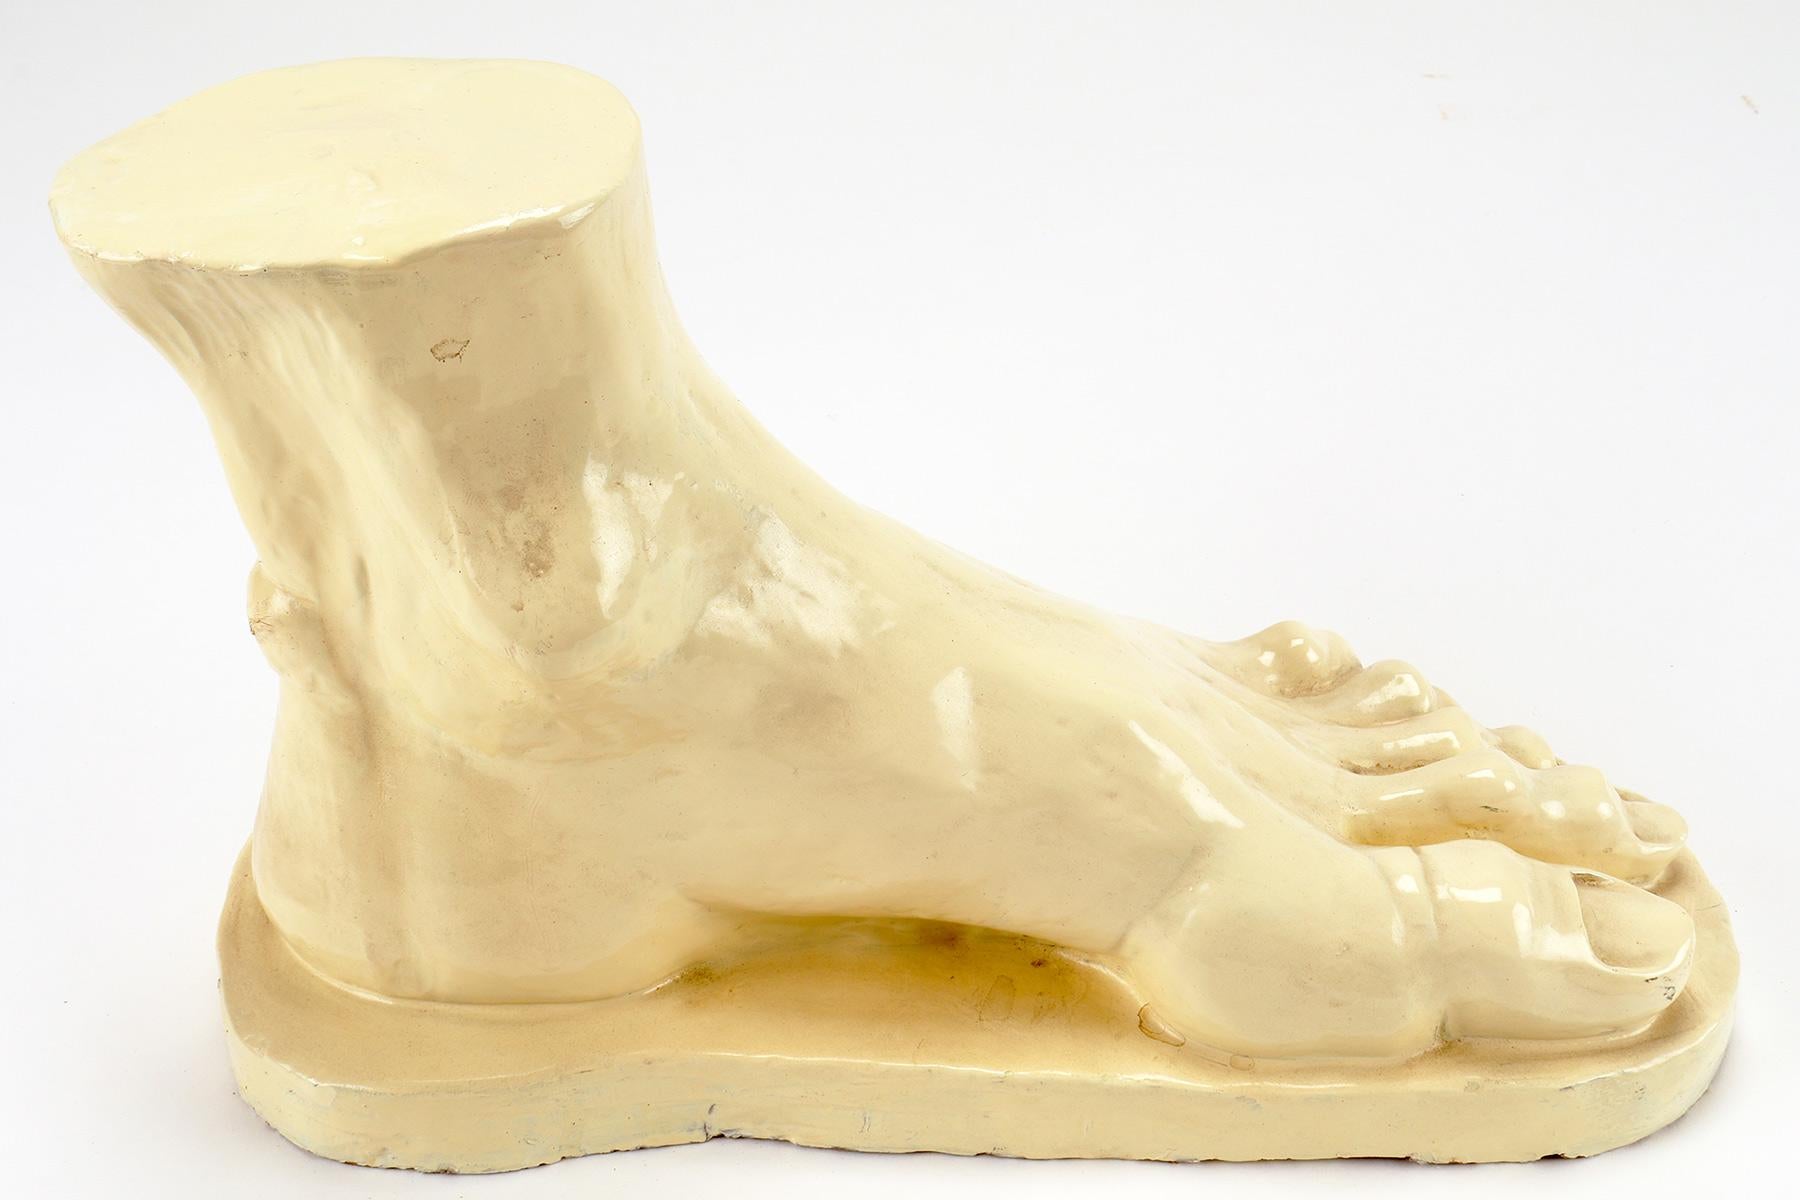 Italian Glazed Clay Sculpture Depicting a Foot, Italy, 1900 For Sale